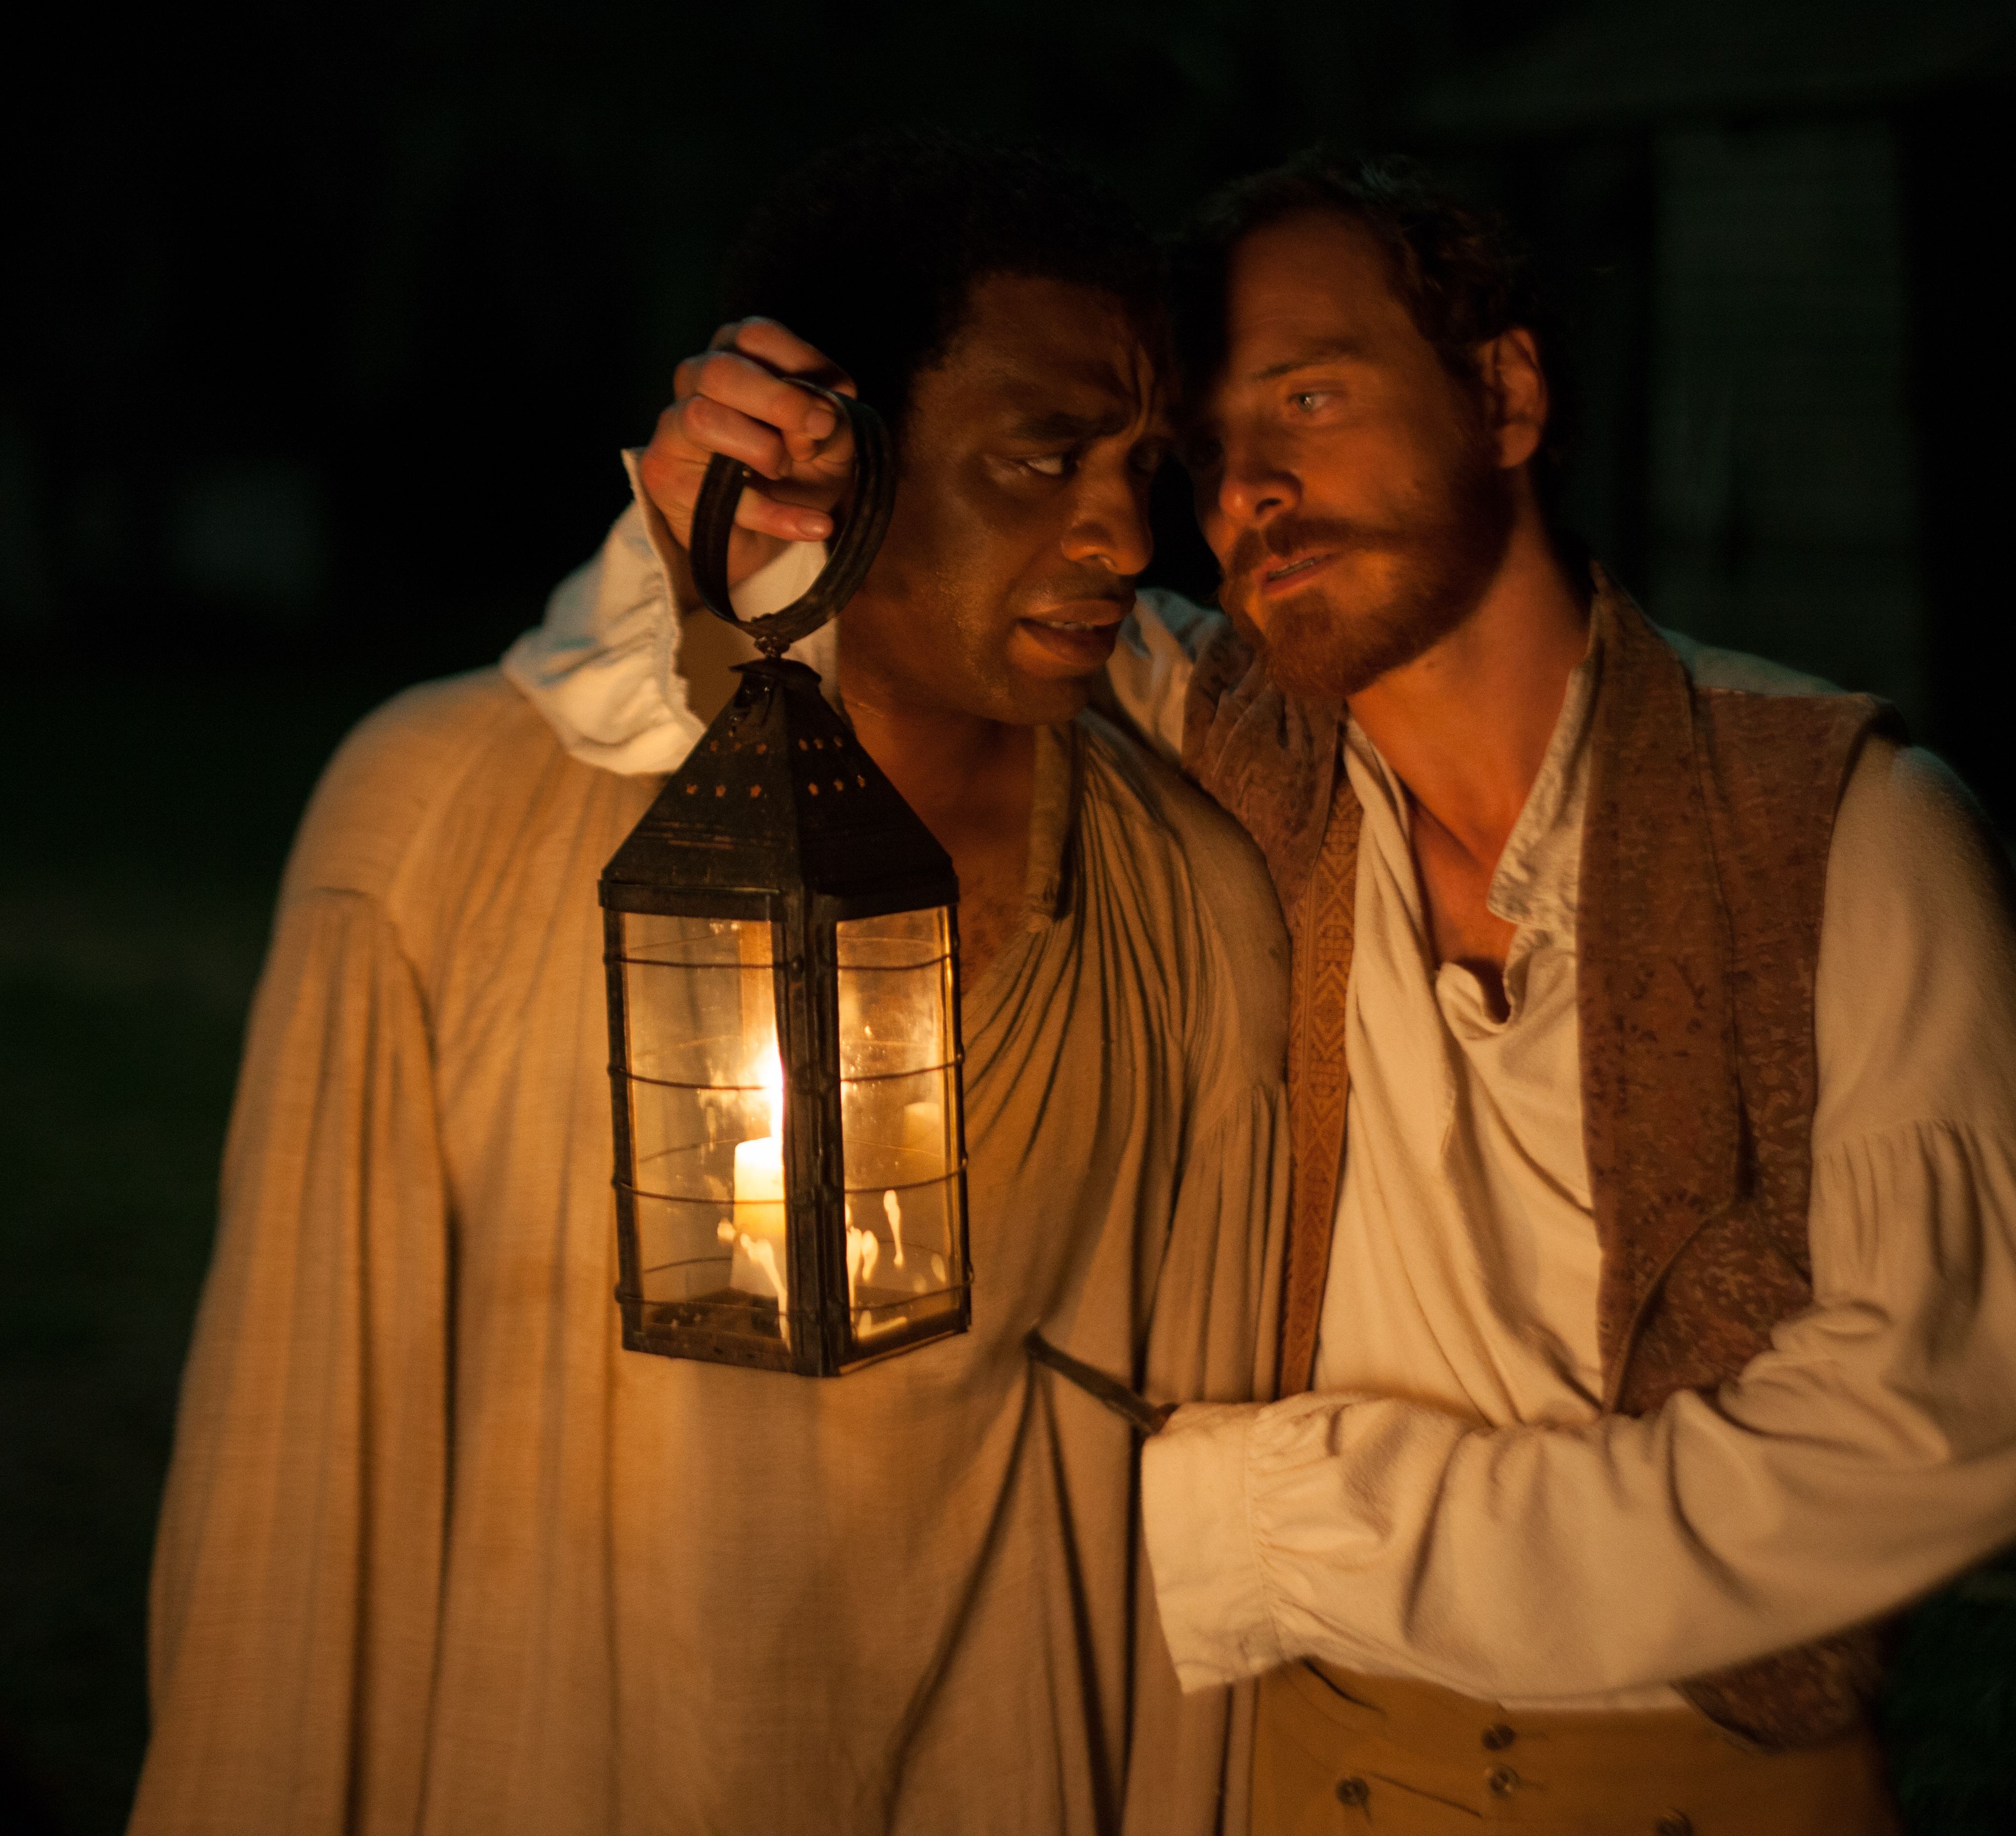 Chiwetel Ejiofor and Michael Fassbender in the dark, with a 